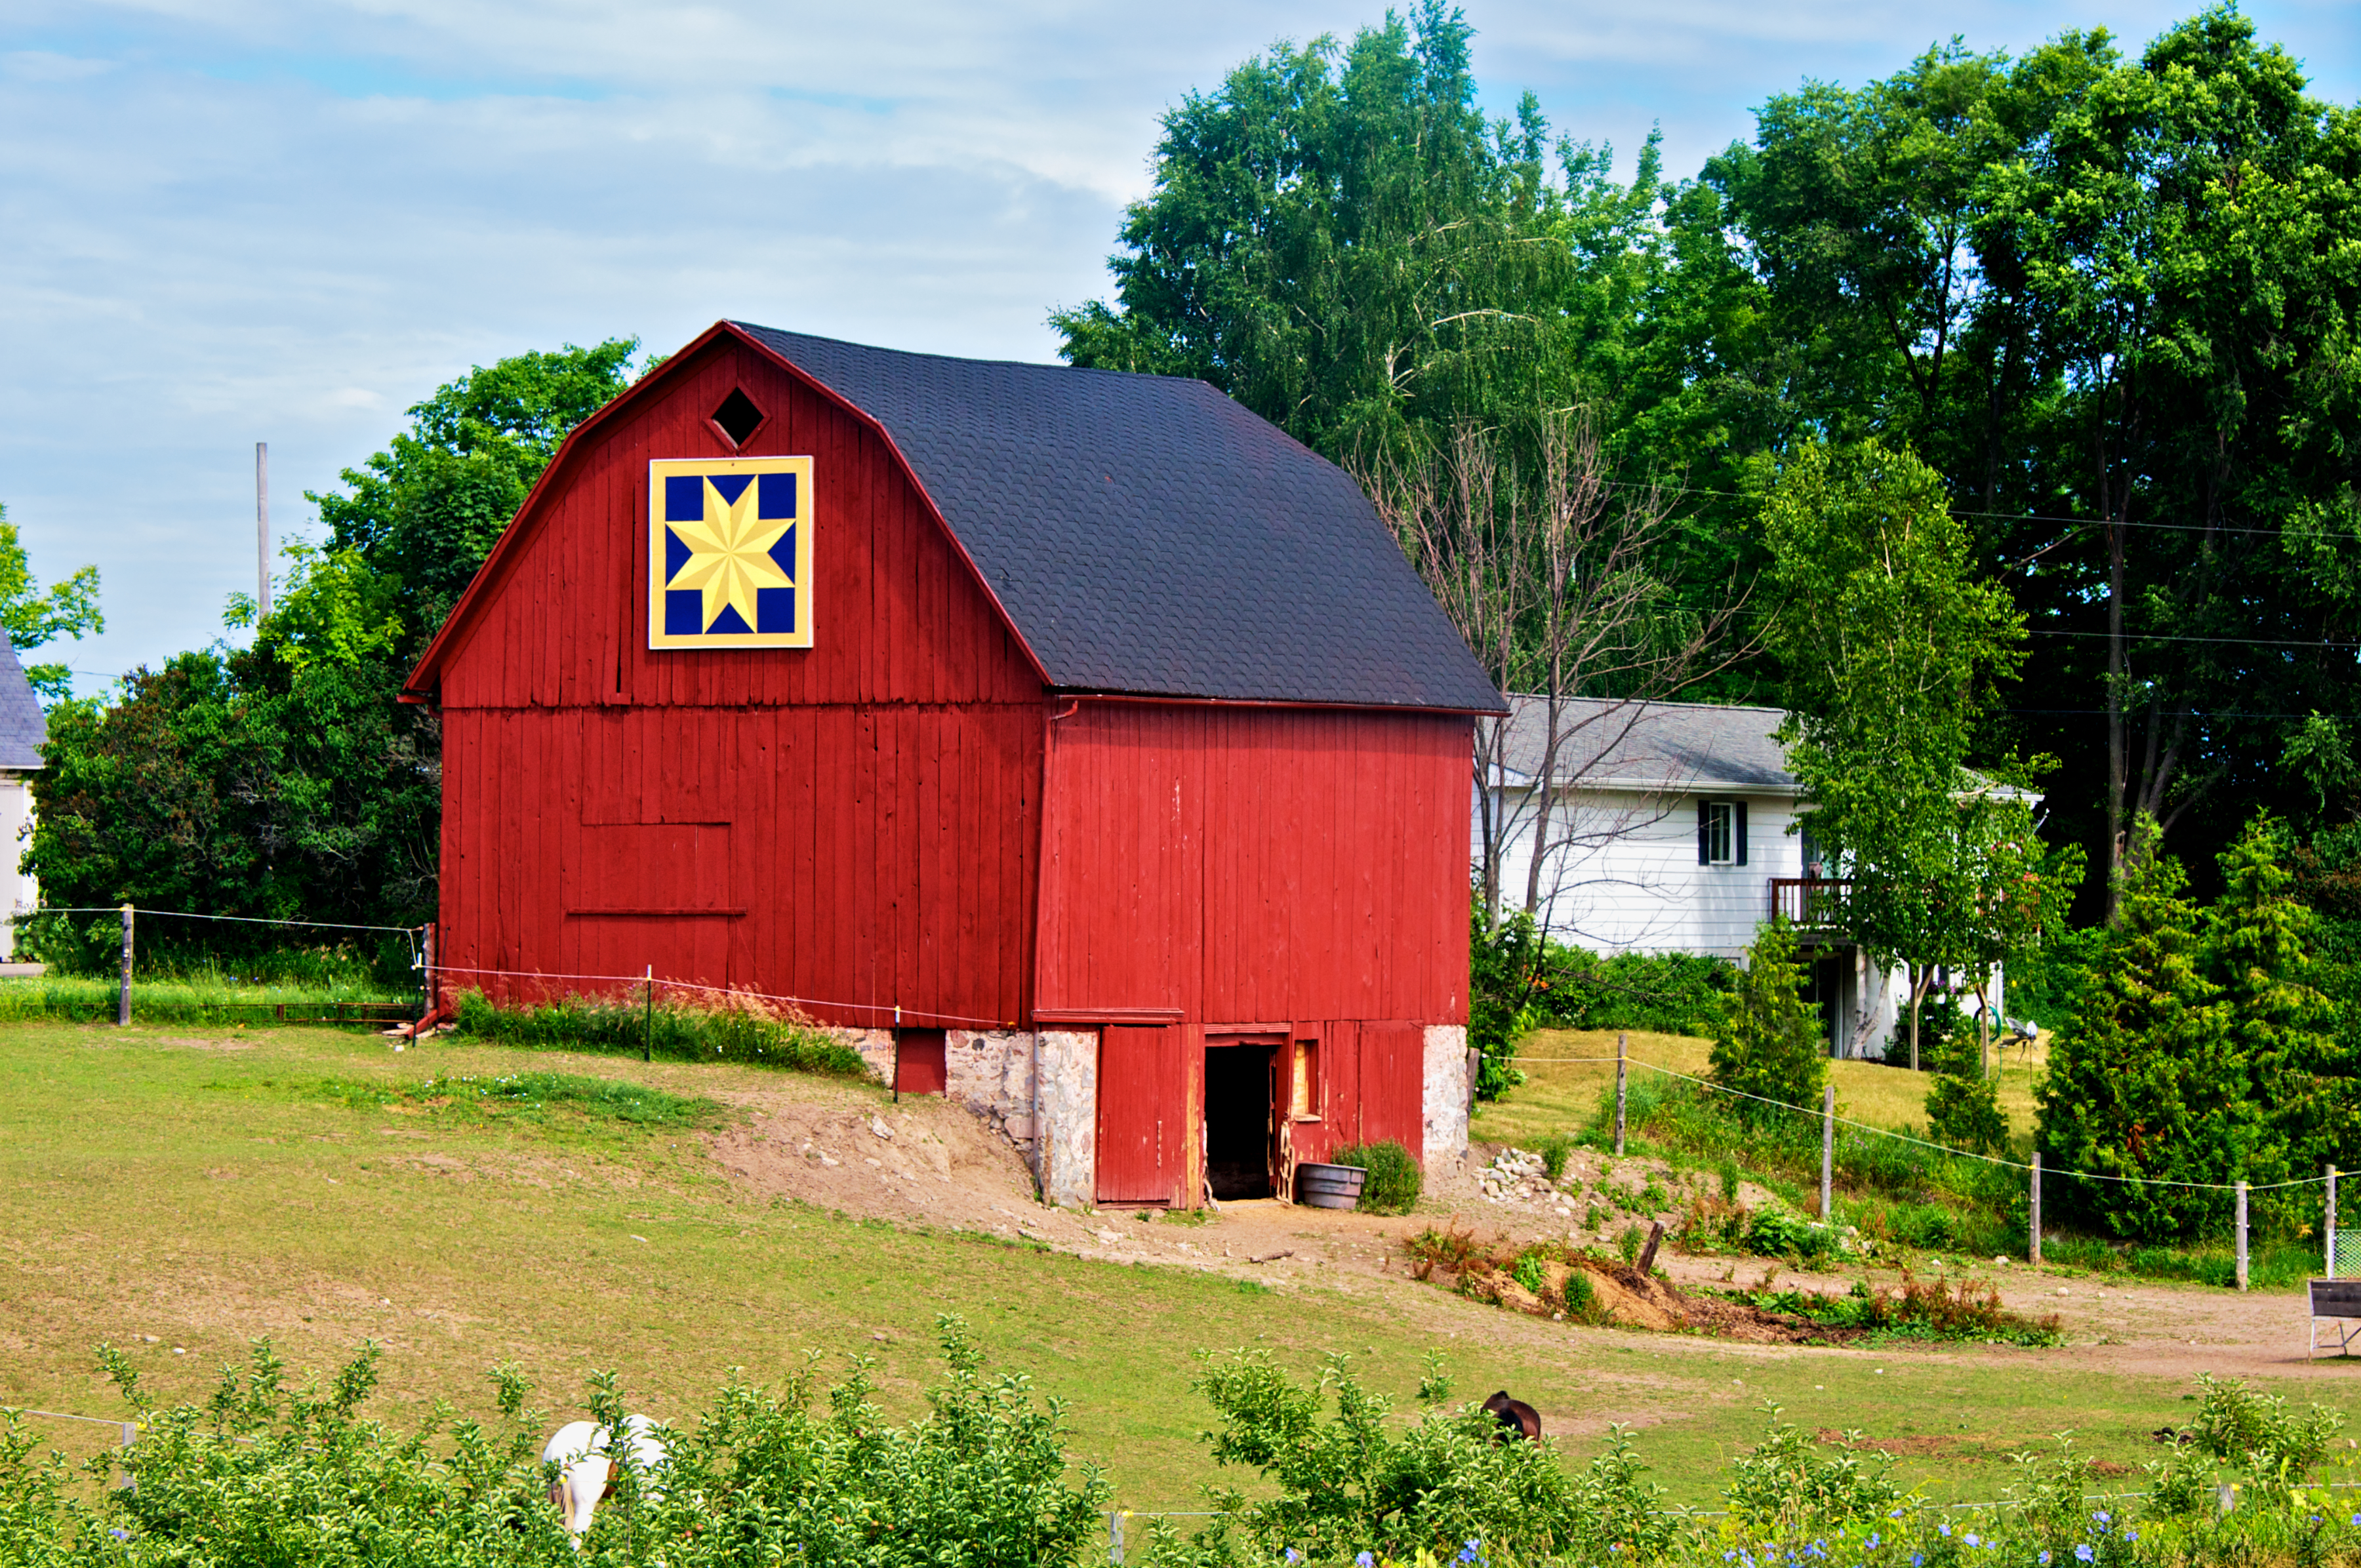 A bright red barn with a golden quilt.